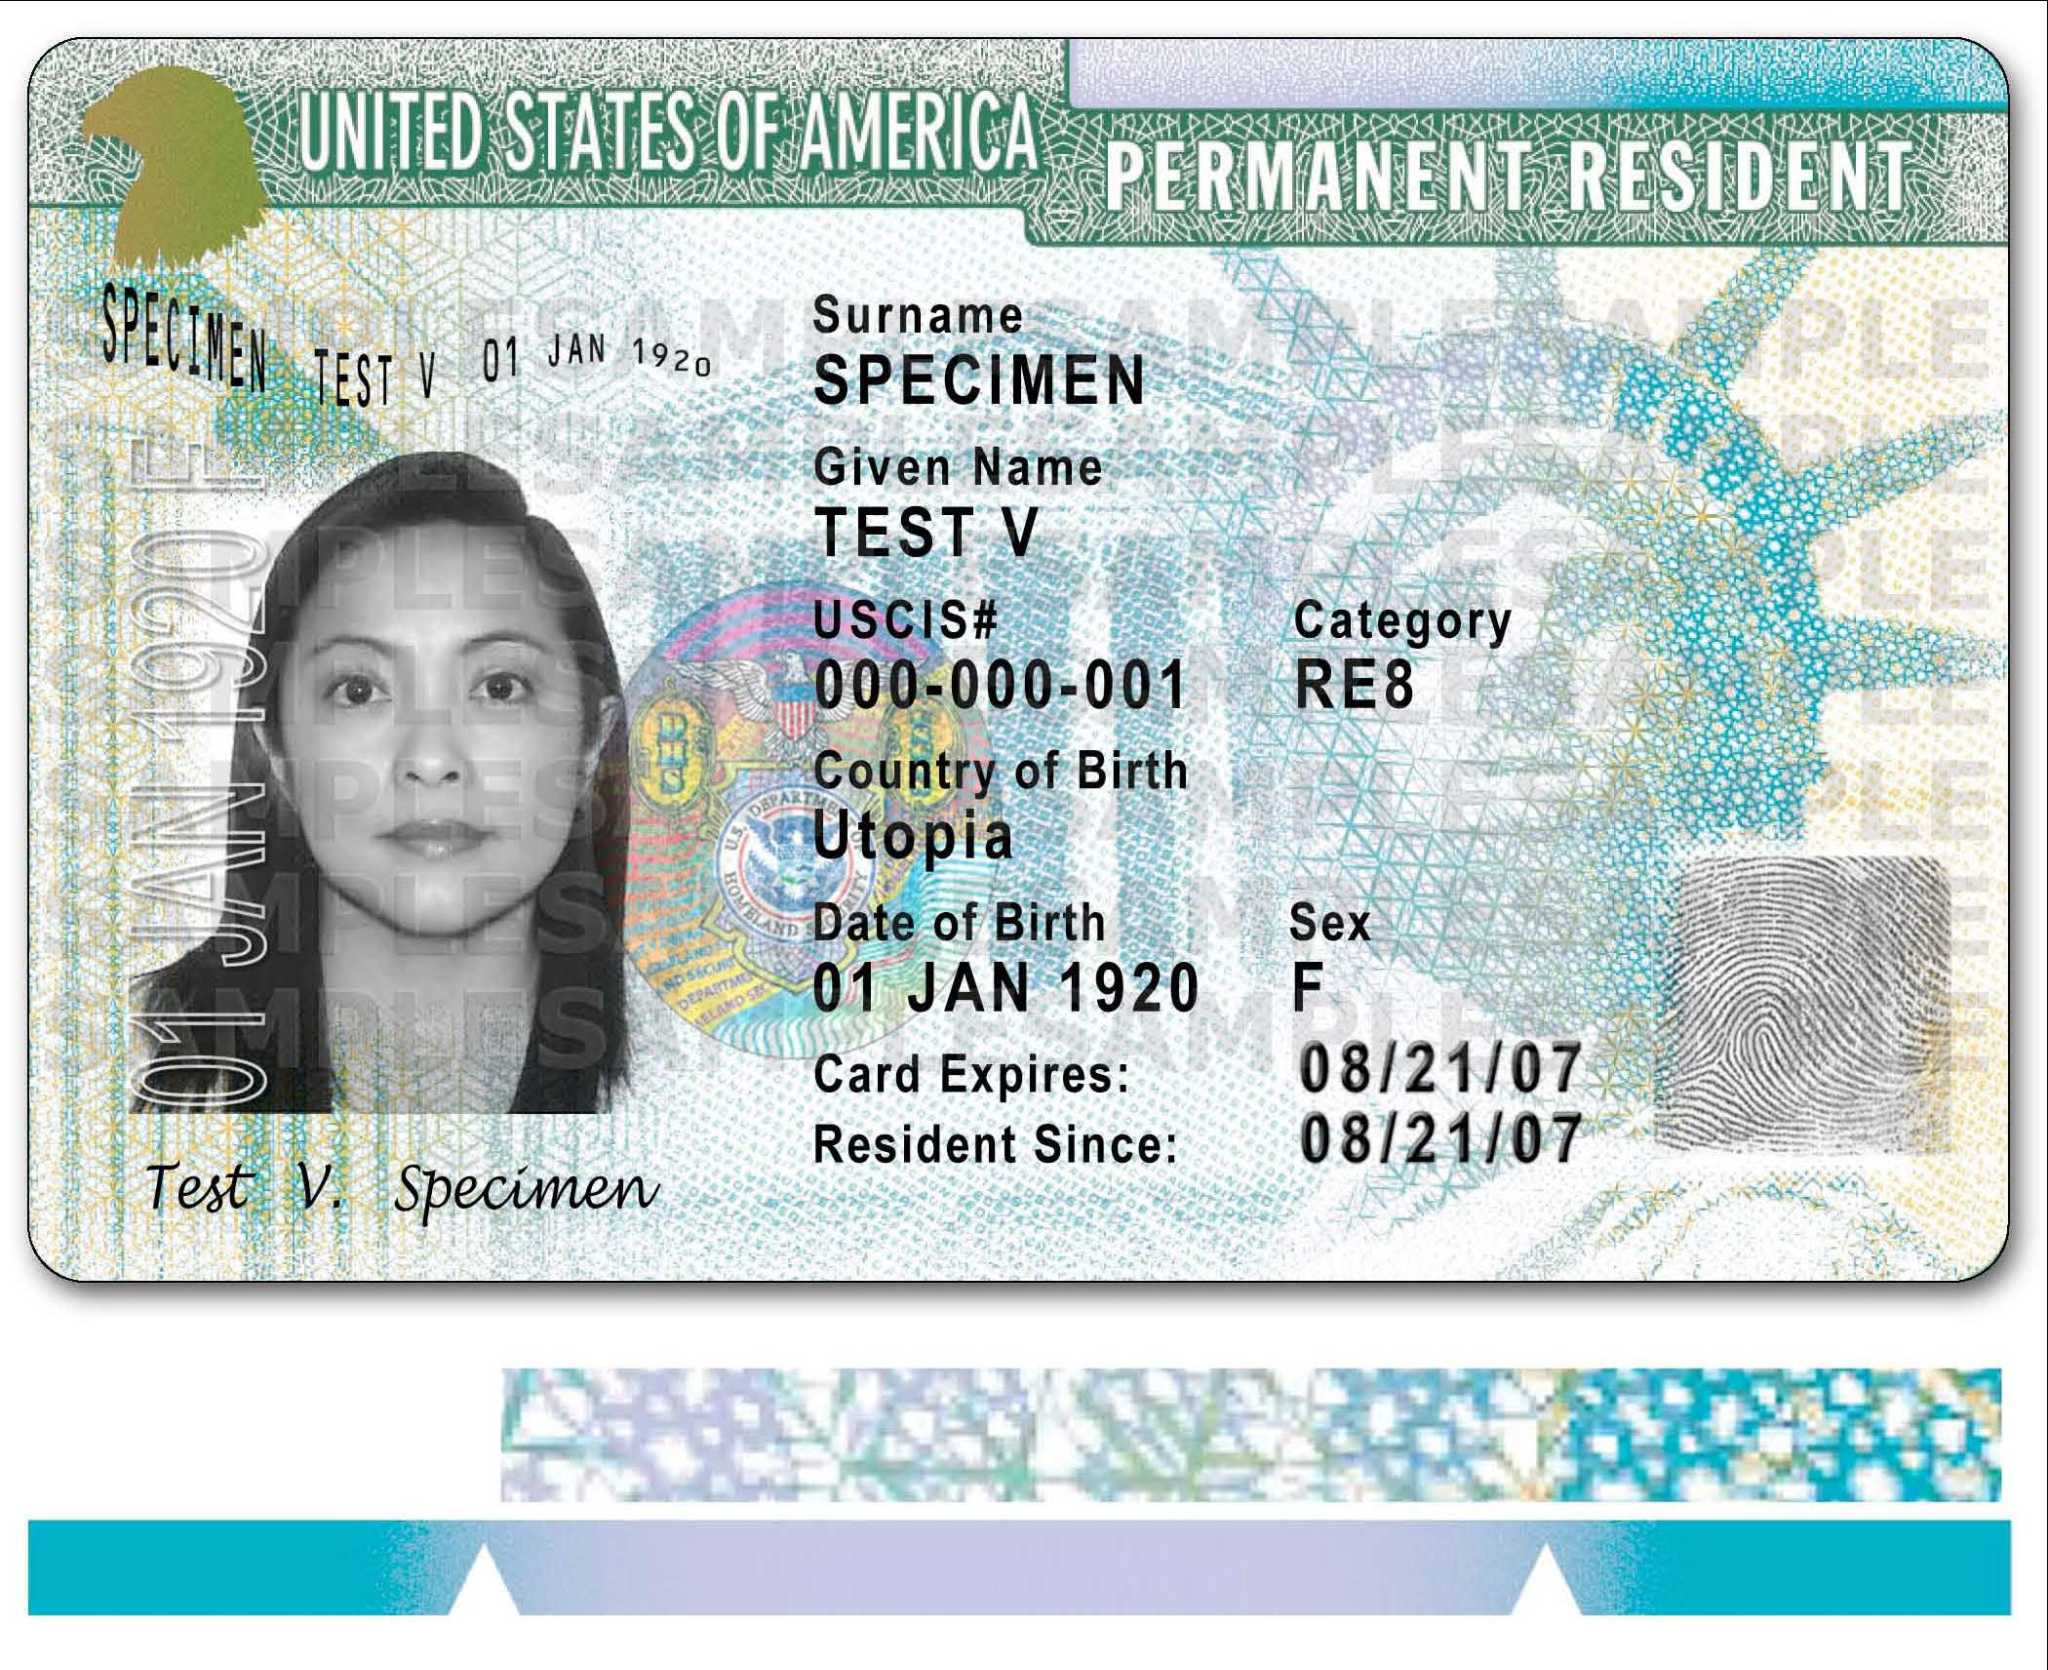 How to get US green card, American Permanent resident visa